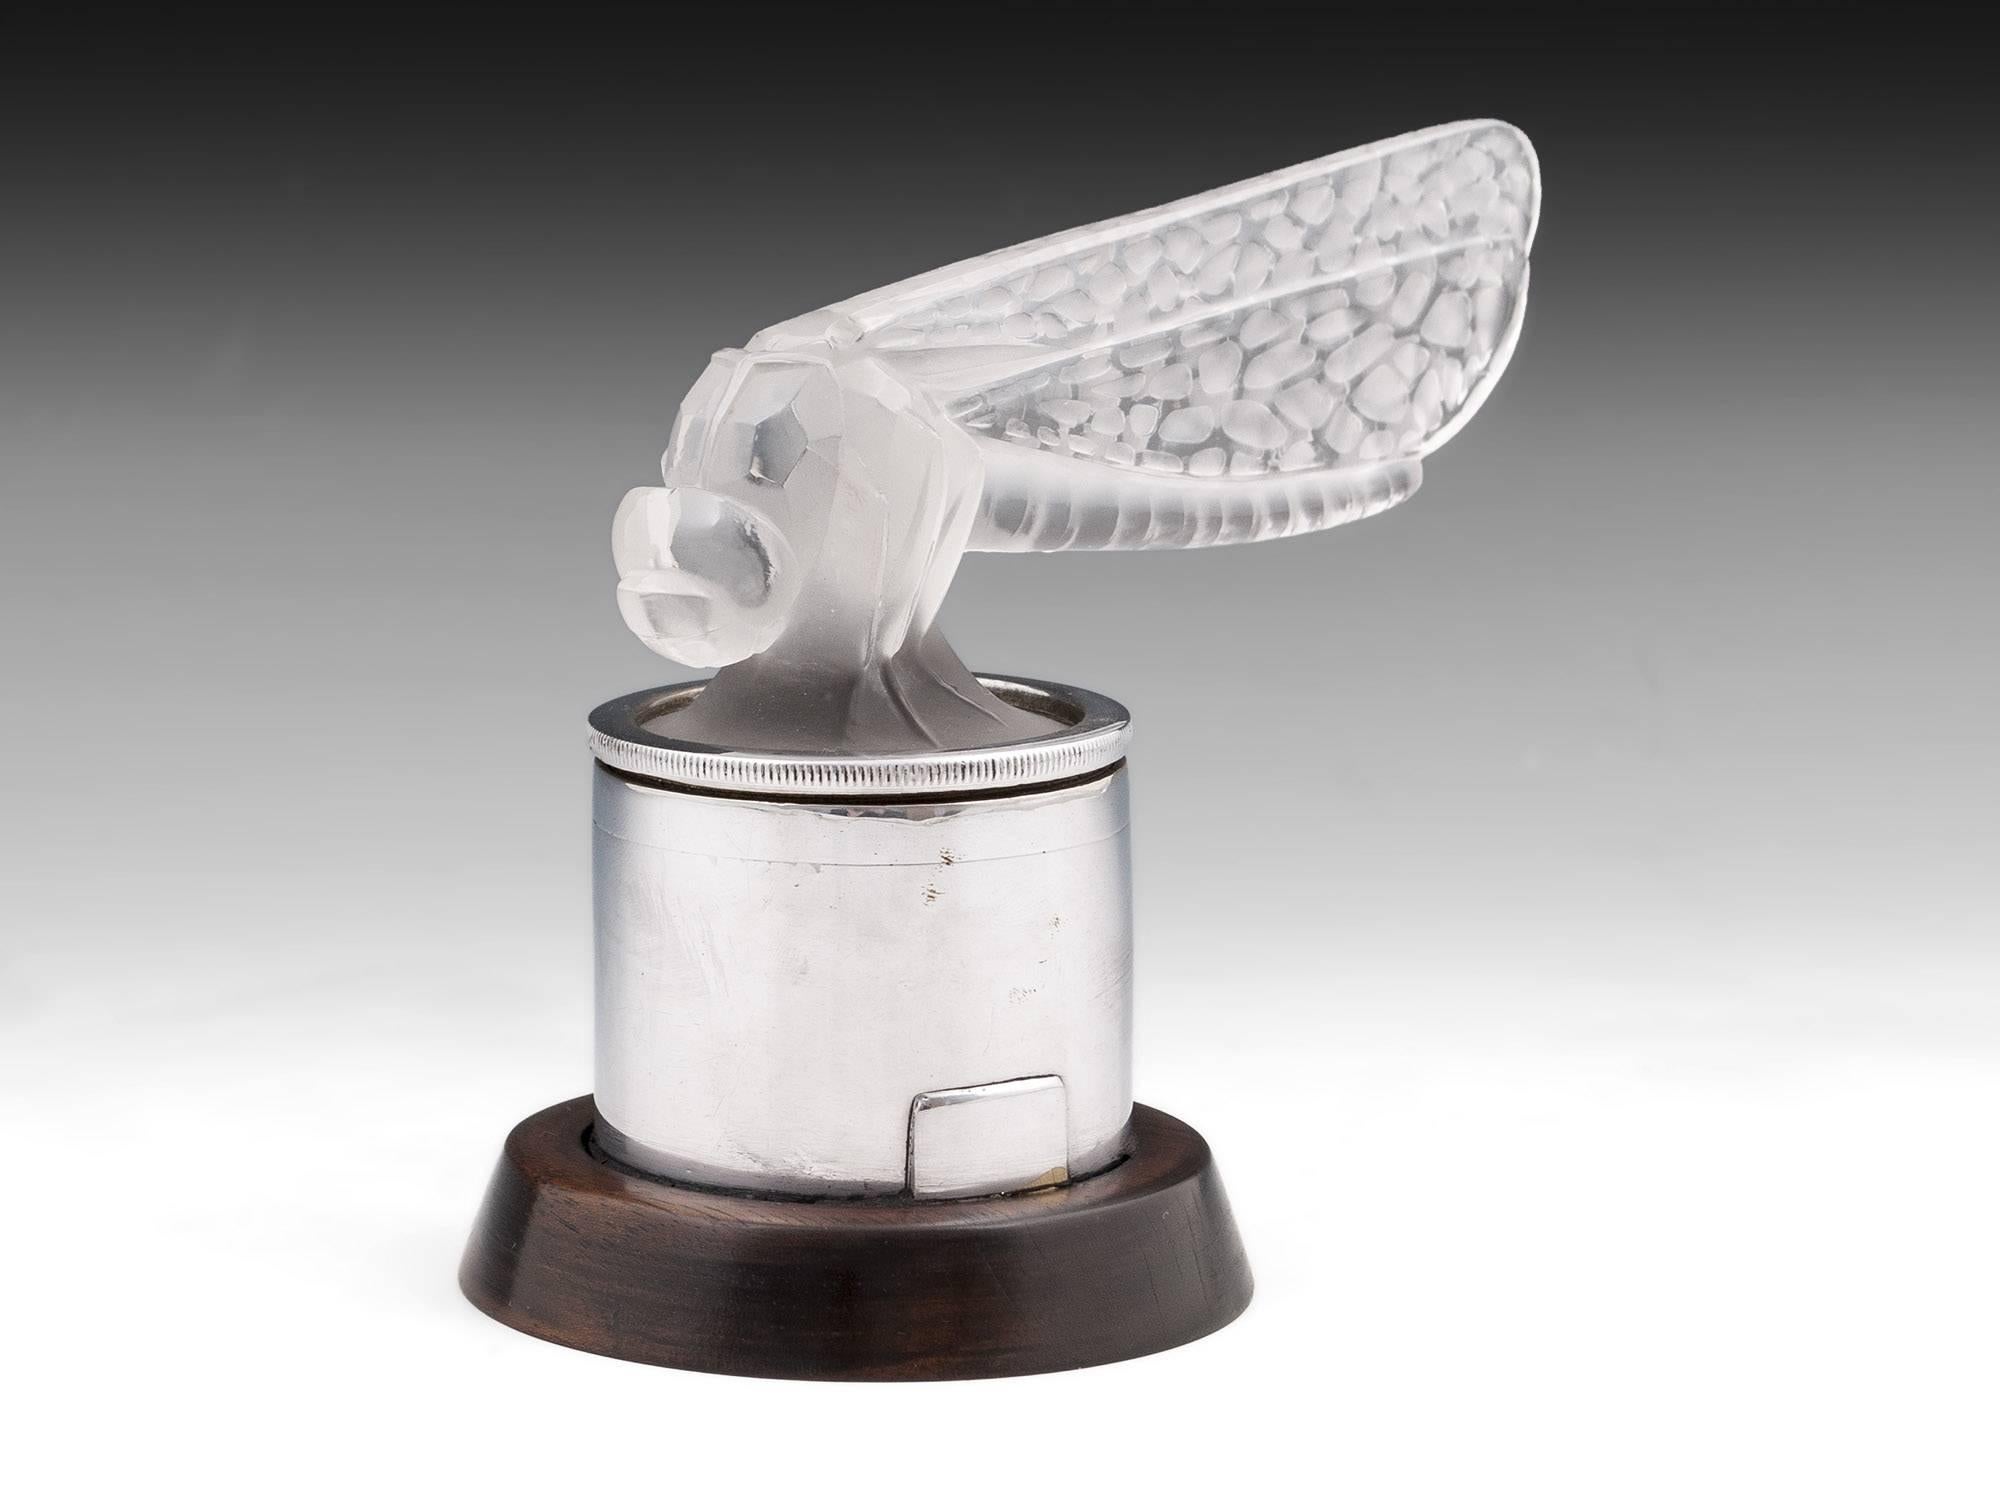 Rene Lalique Petite Libellule Small Dragonfly Car Mascot In Excellent Condition In Northampton, United Kingdom